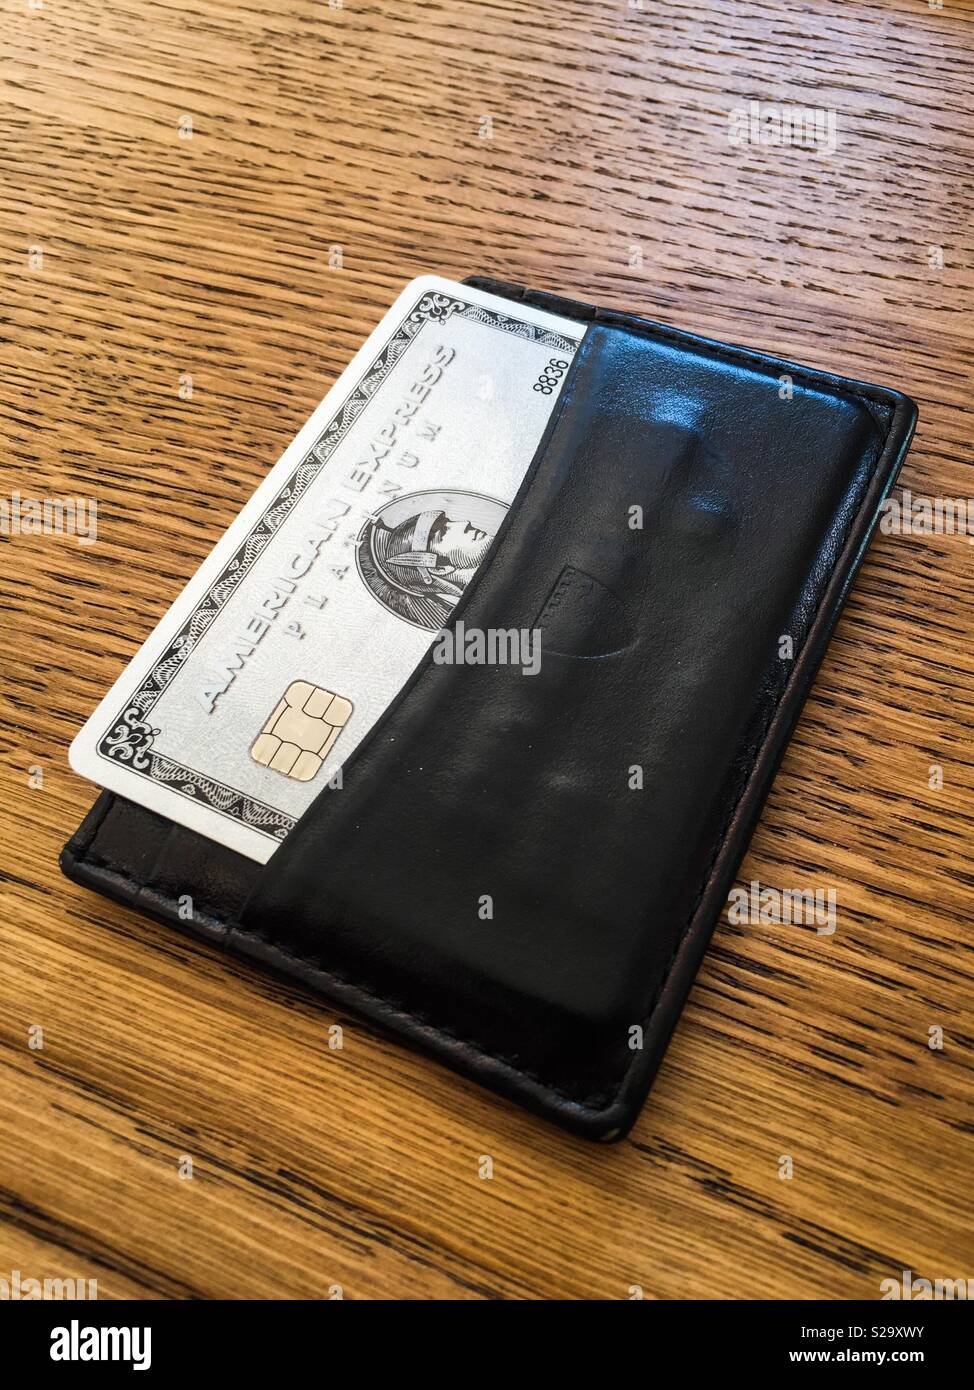 Platinum American Express charge card in a leather card holder. Stock Photo